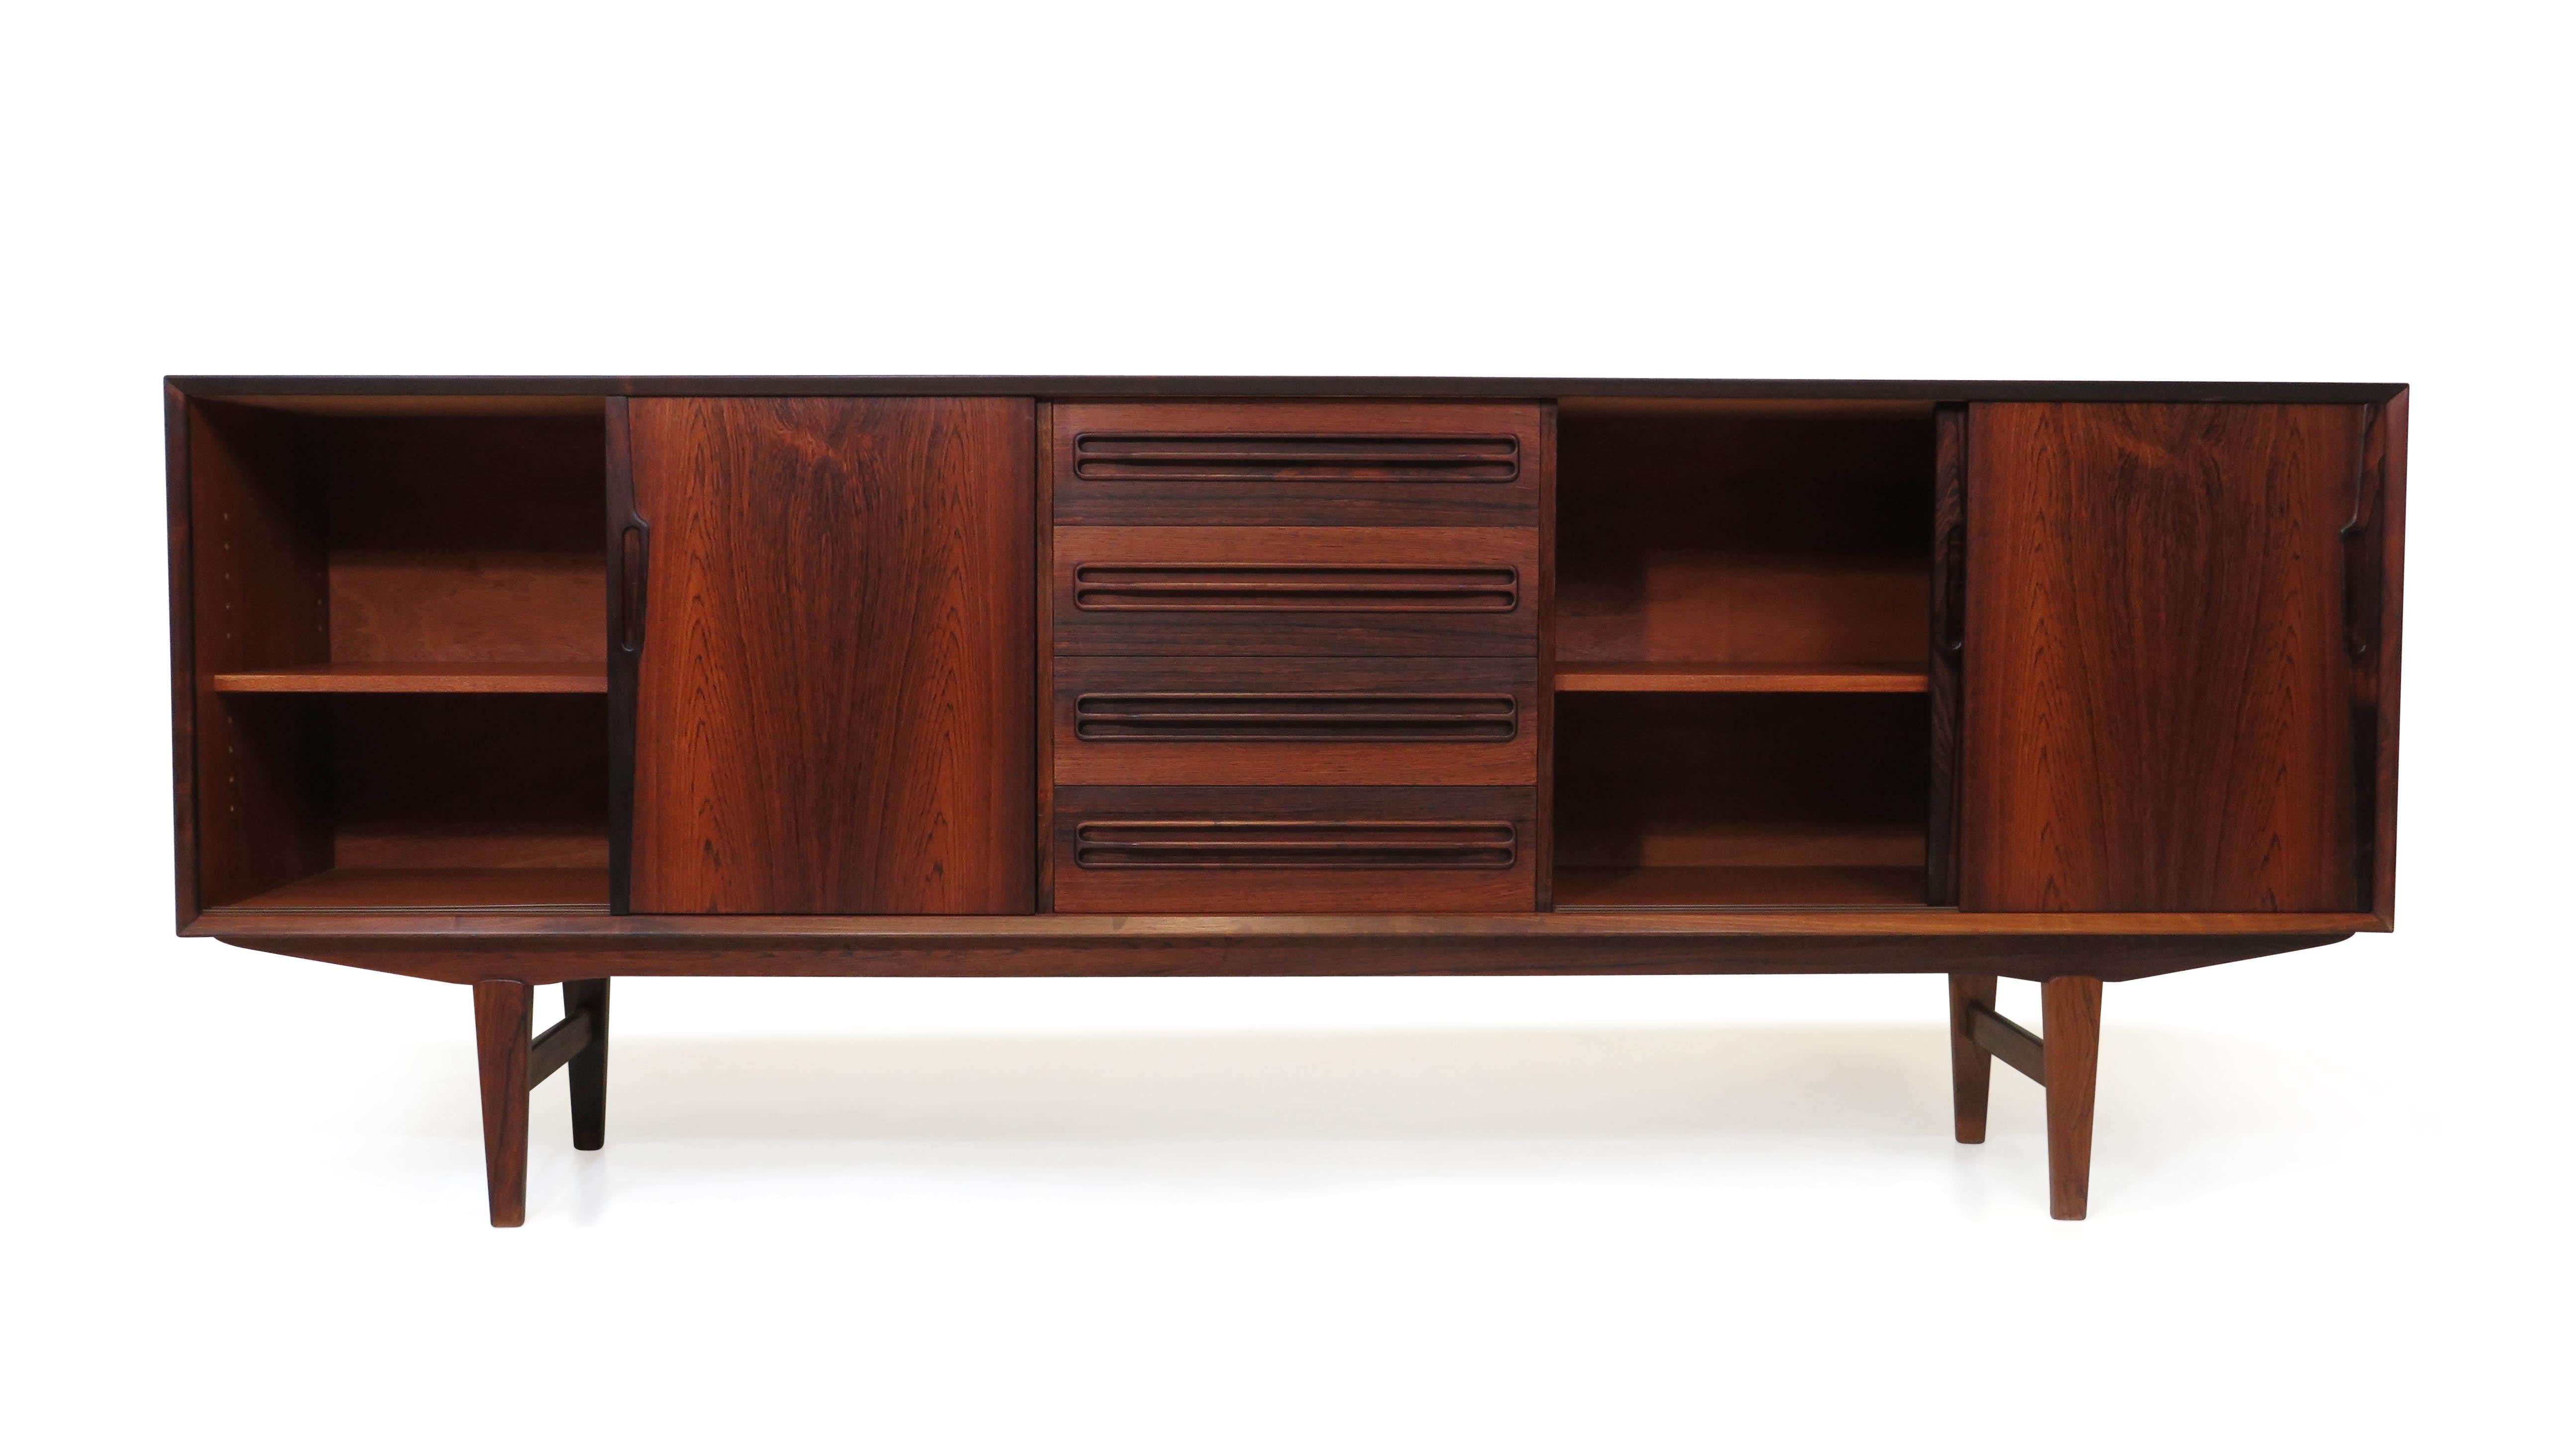 Mid-century Danish Brazilian rosewood credenza finely crafted with mitered edges, book-matched grain and recessed square pulls. The cabinet has four sliding doors revealing a mahogany interior with adjustable shelves and fou drawers in center,